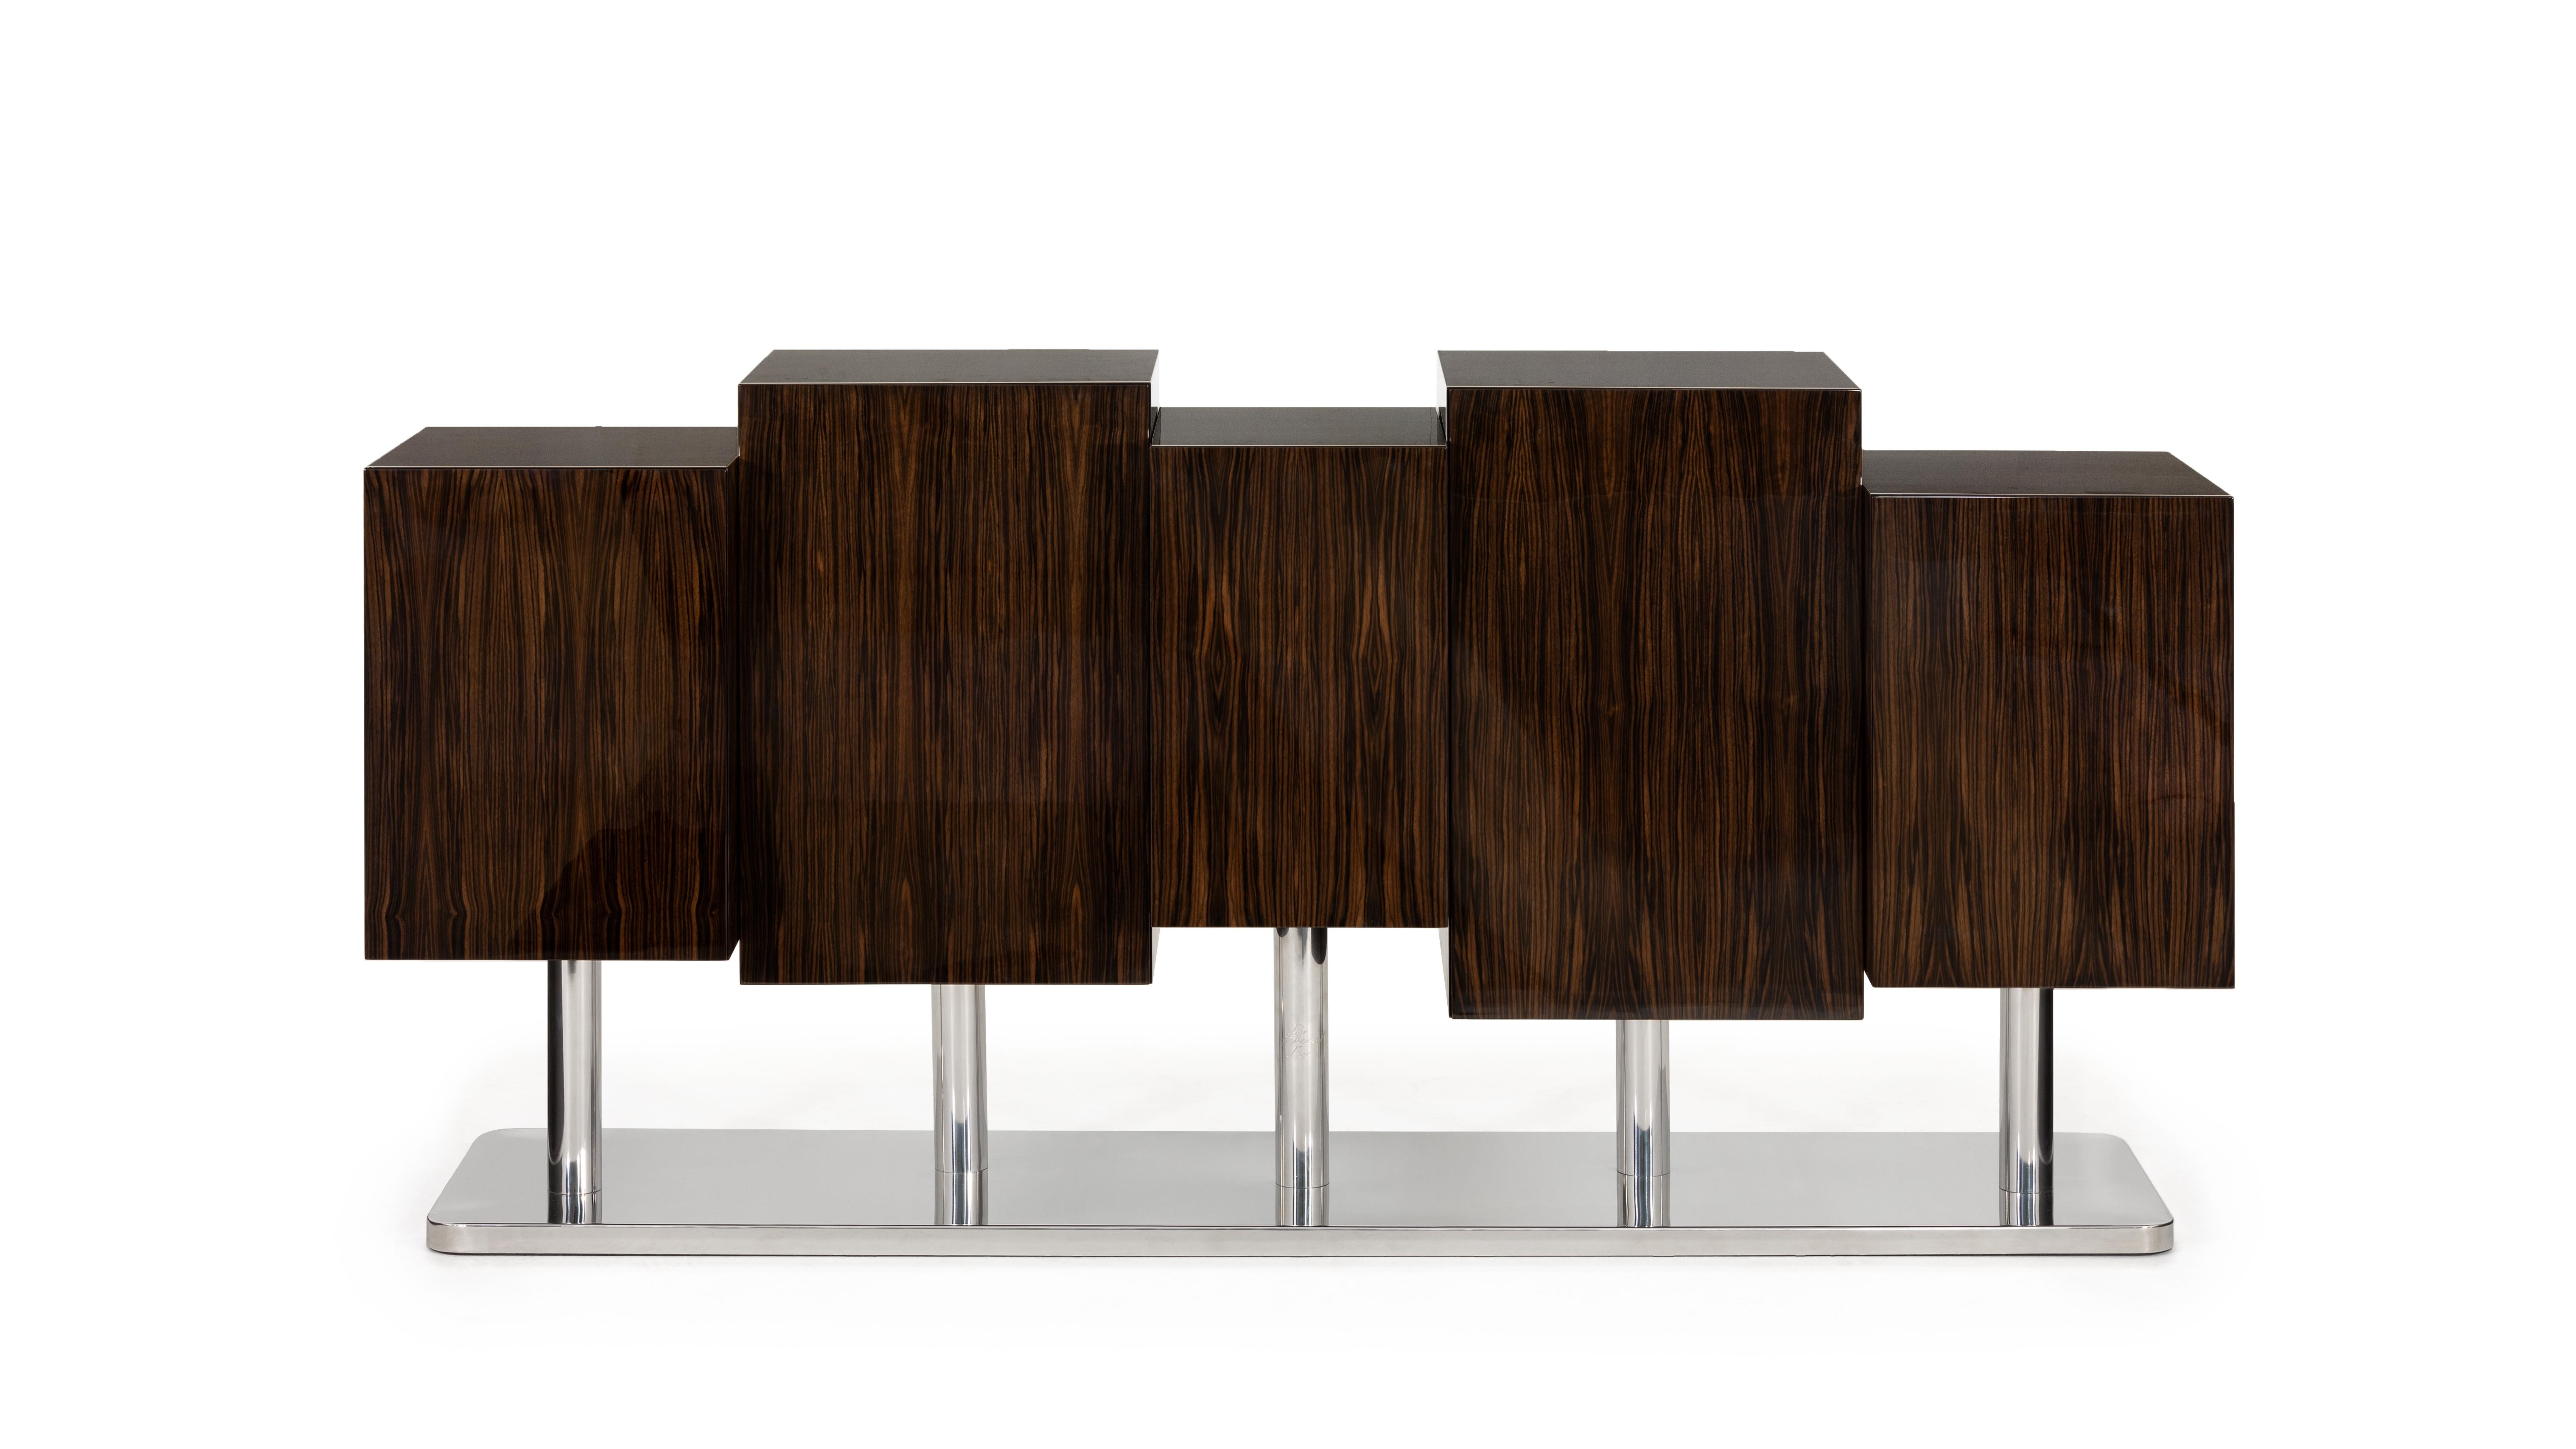 The Special Tree Sideboard by InsidherLand
Dimensions: D 53 x W 200 x H 95 cm.
Materials: 
Wooden structure: Ebony Macassar. Shelves: glass. Base, tubes, and shelf supports: polished stainless steel.
130 kg.

The Special Tree sideboard is a redesign